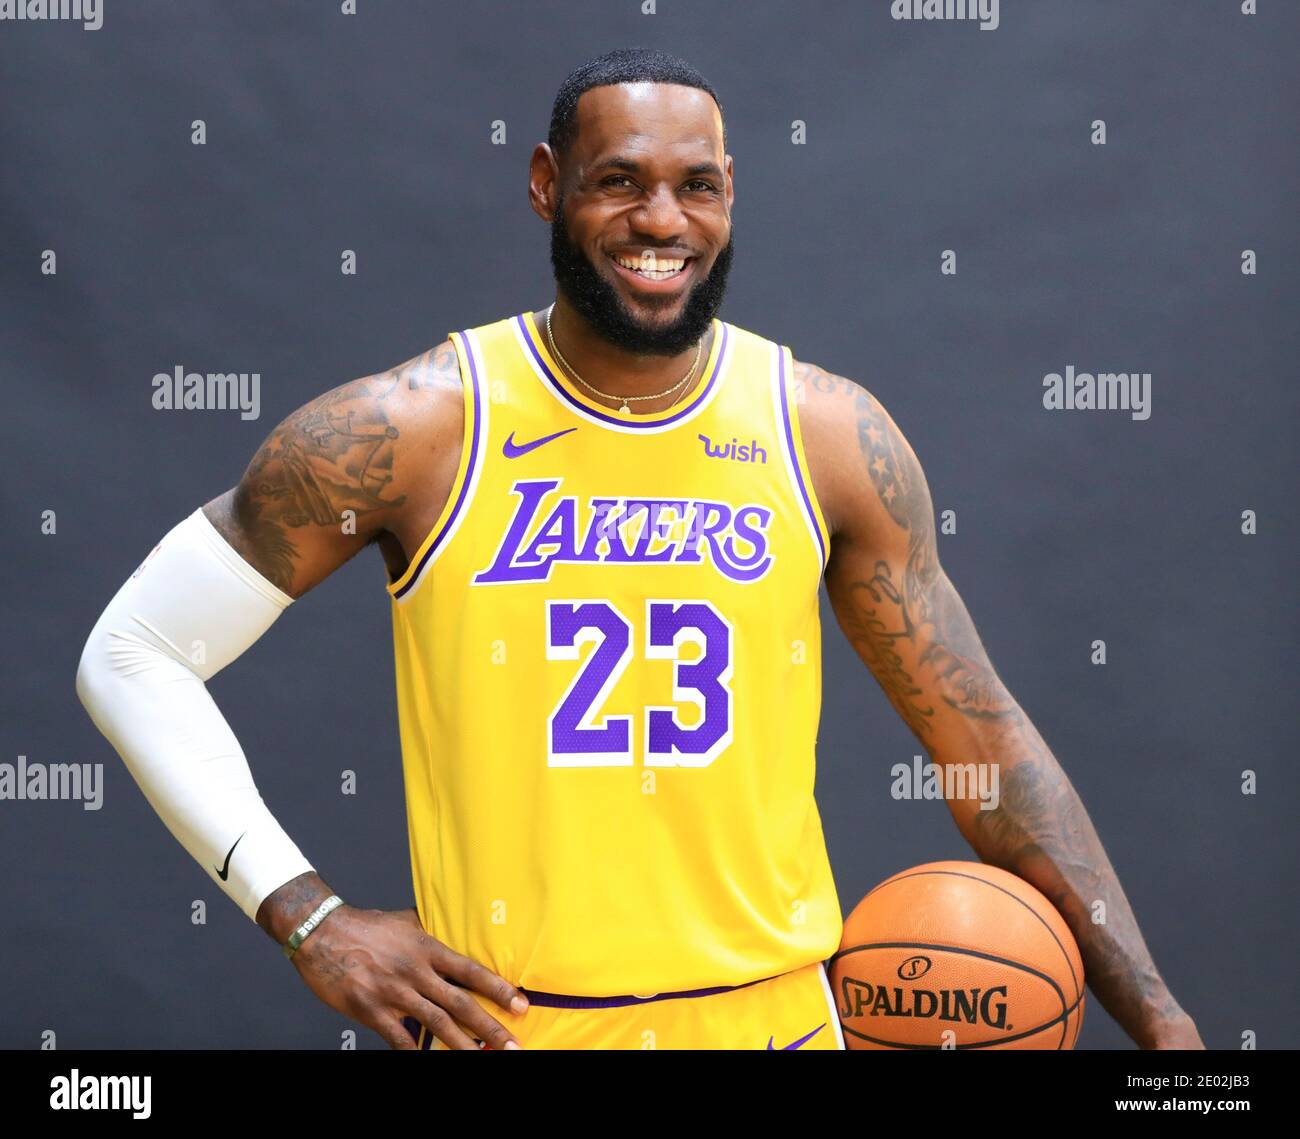 Beijing, USA. 27th Sep, 2019. Lebron James of Los Angeles Lakers